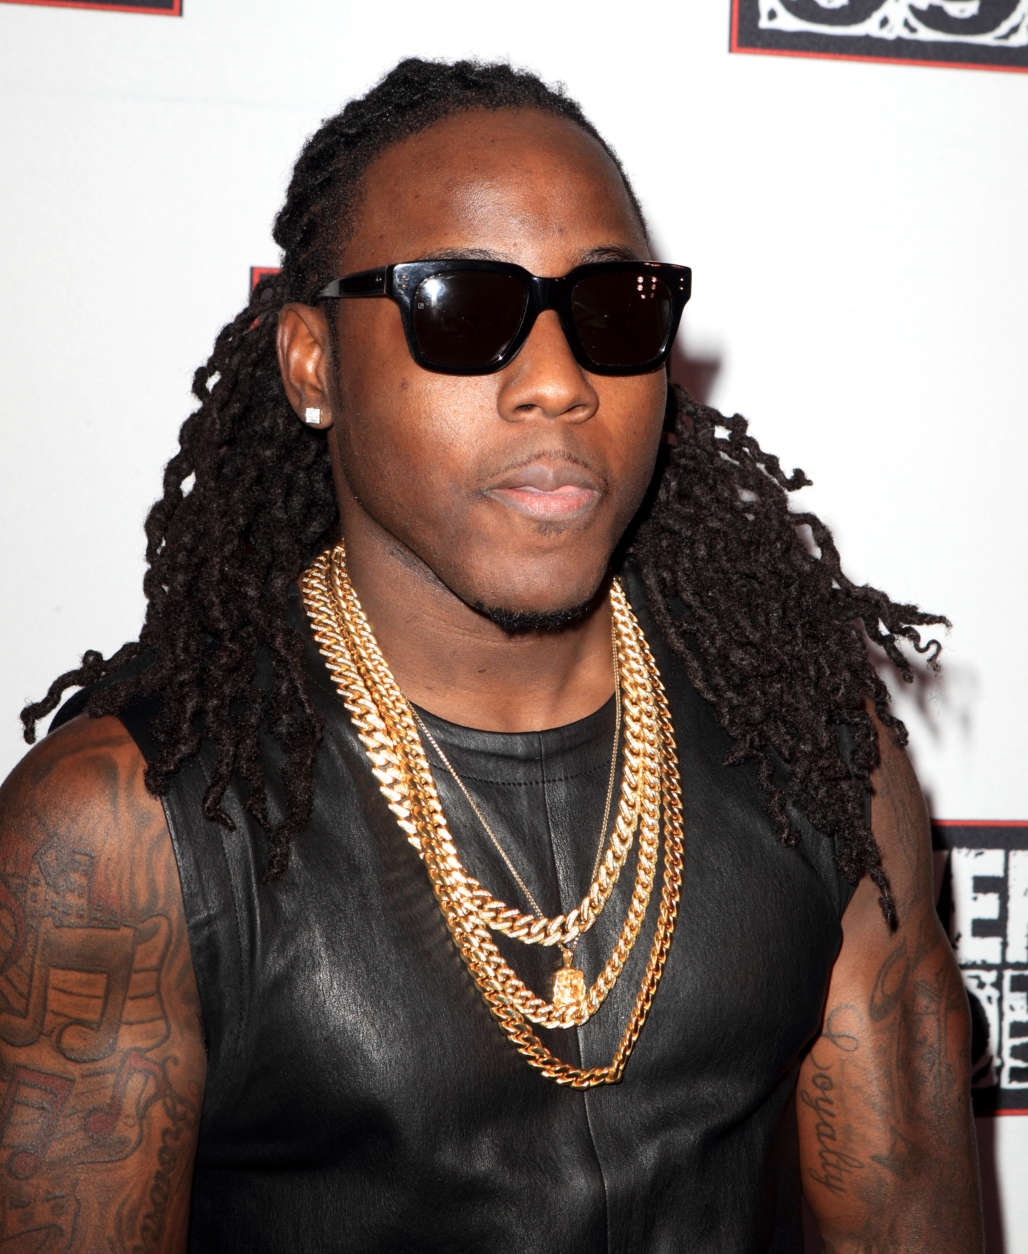 Rapper Ace Hood is 29 on May 11. 
Ace Hood performs during the Power 99 Powerhouse 2013 concert at the Wells Fargo Center on Friday, October 25, 2013, in Philadelphia. (Photo by Owen Sweeney/Invision/AP)